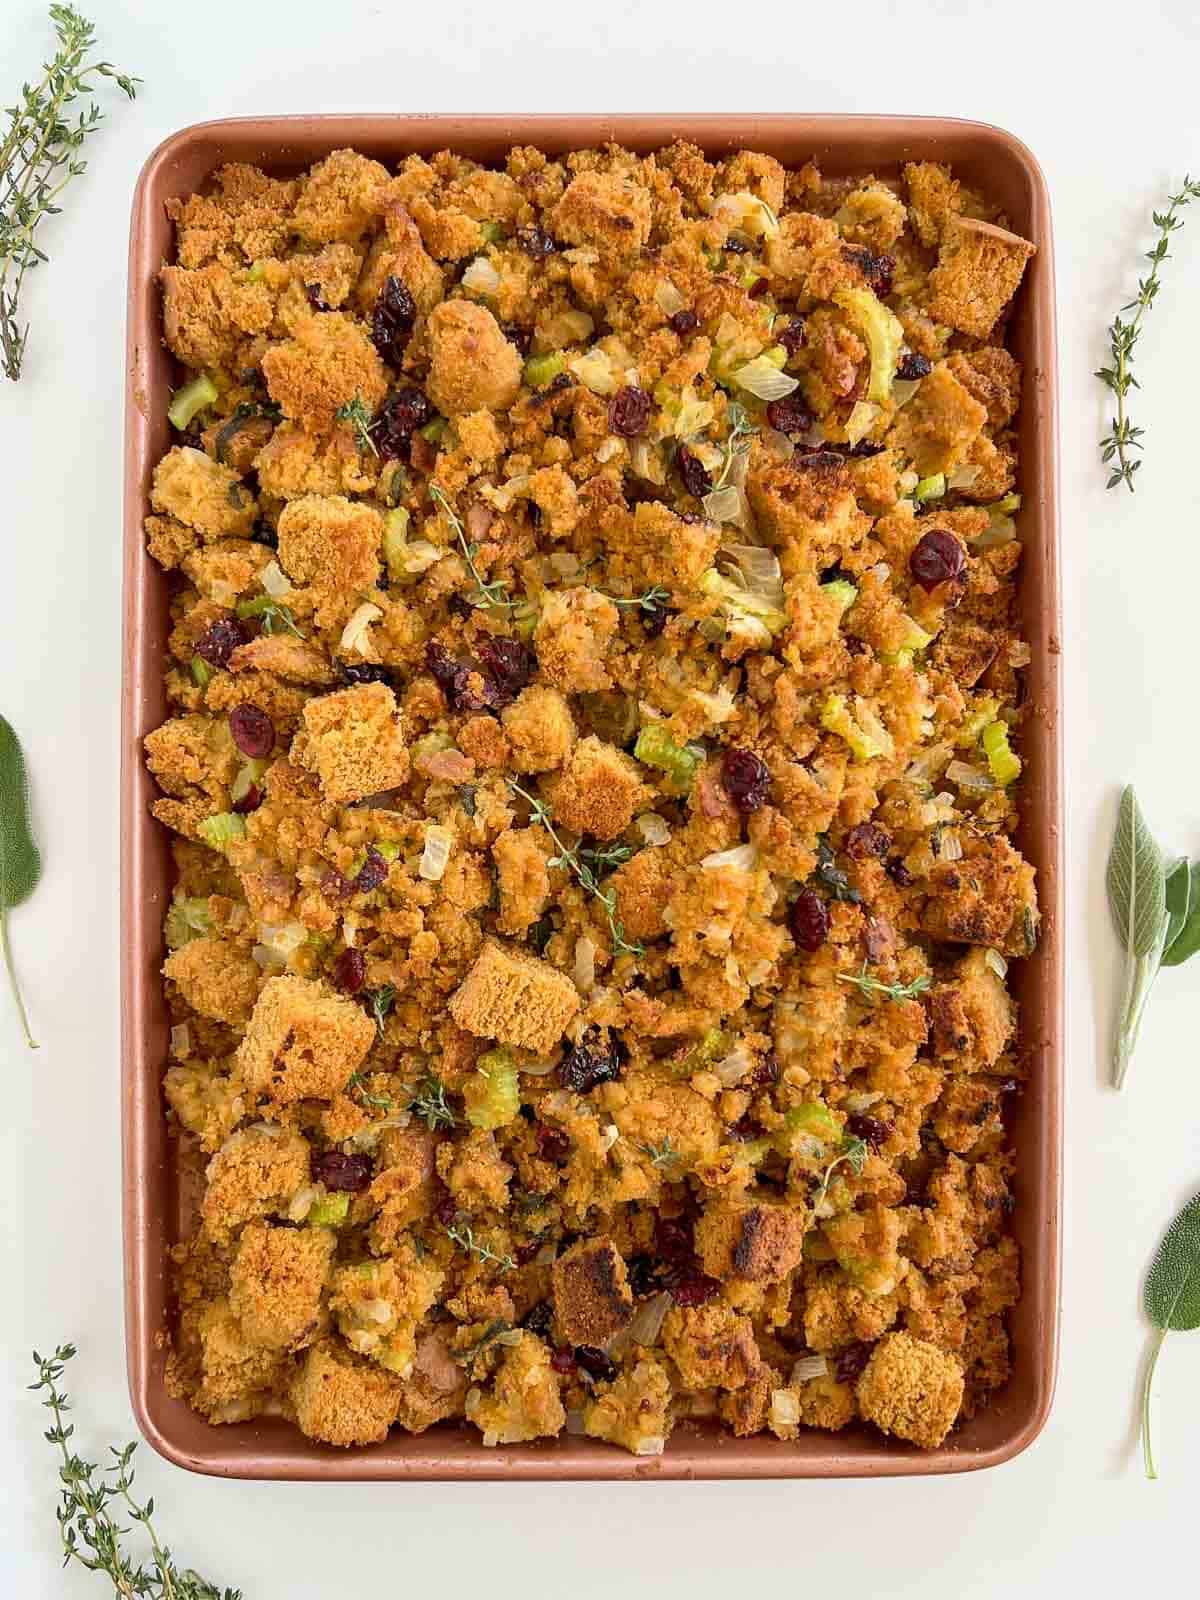 cornbread stuffing out of the oven served with thyme sprigs on top.